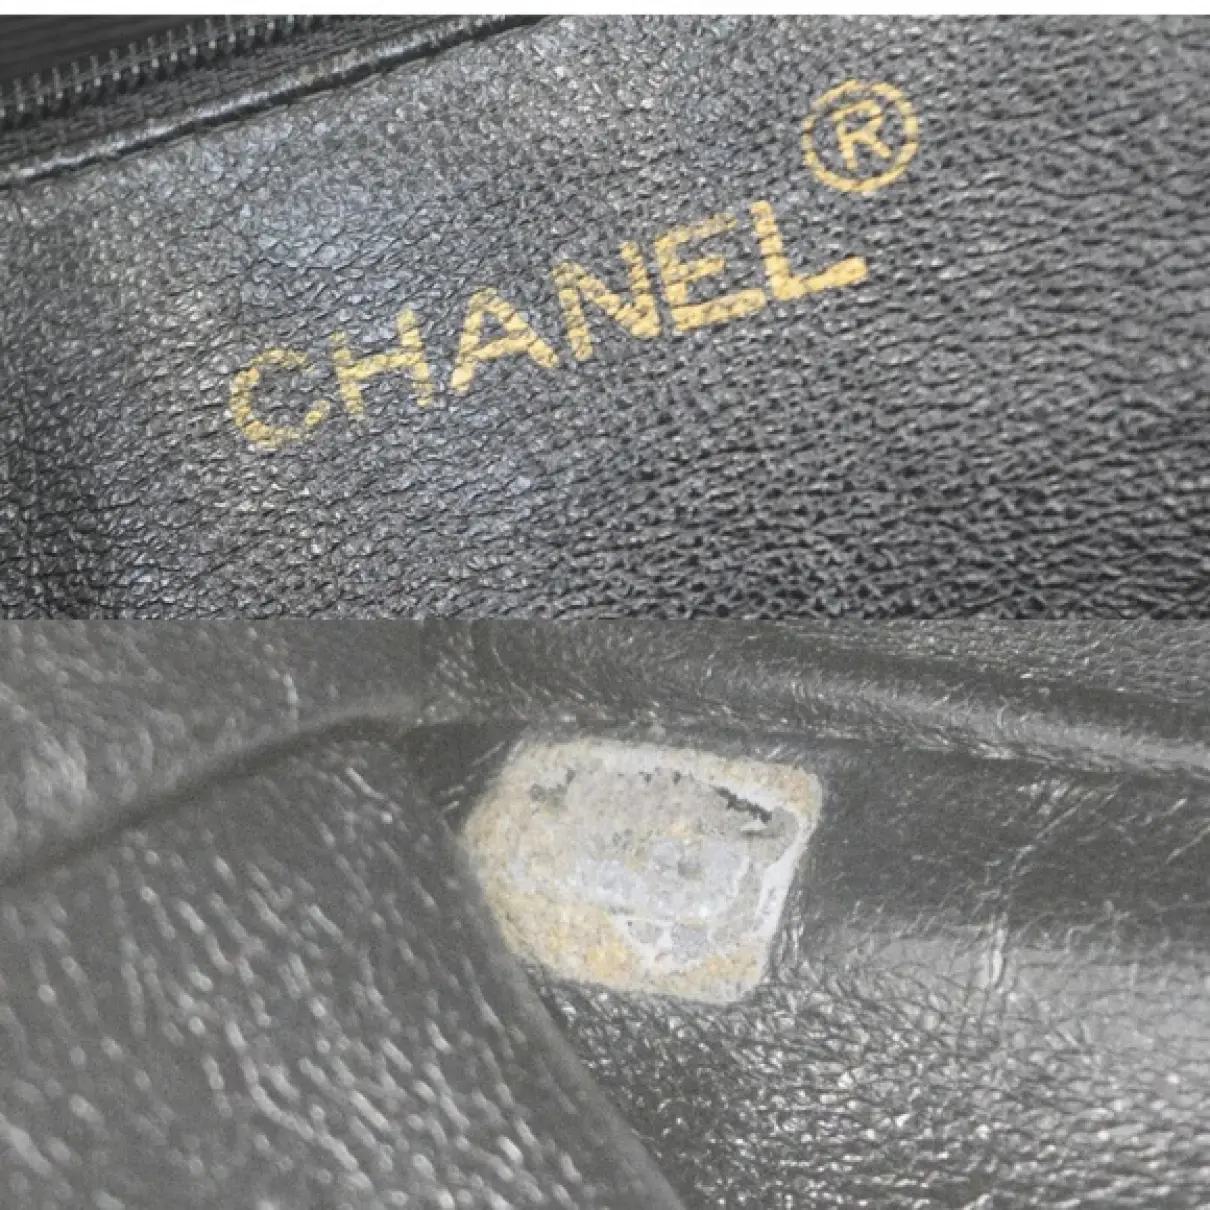 Leather tote Chanel - Vintage